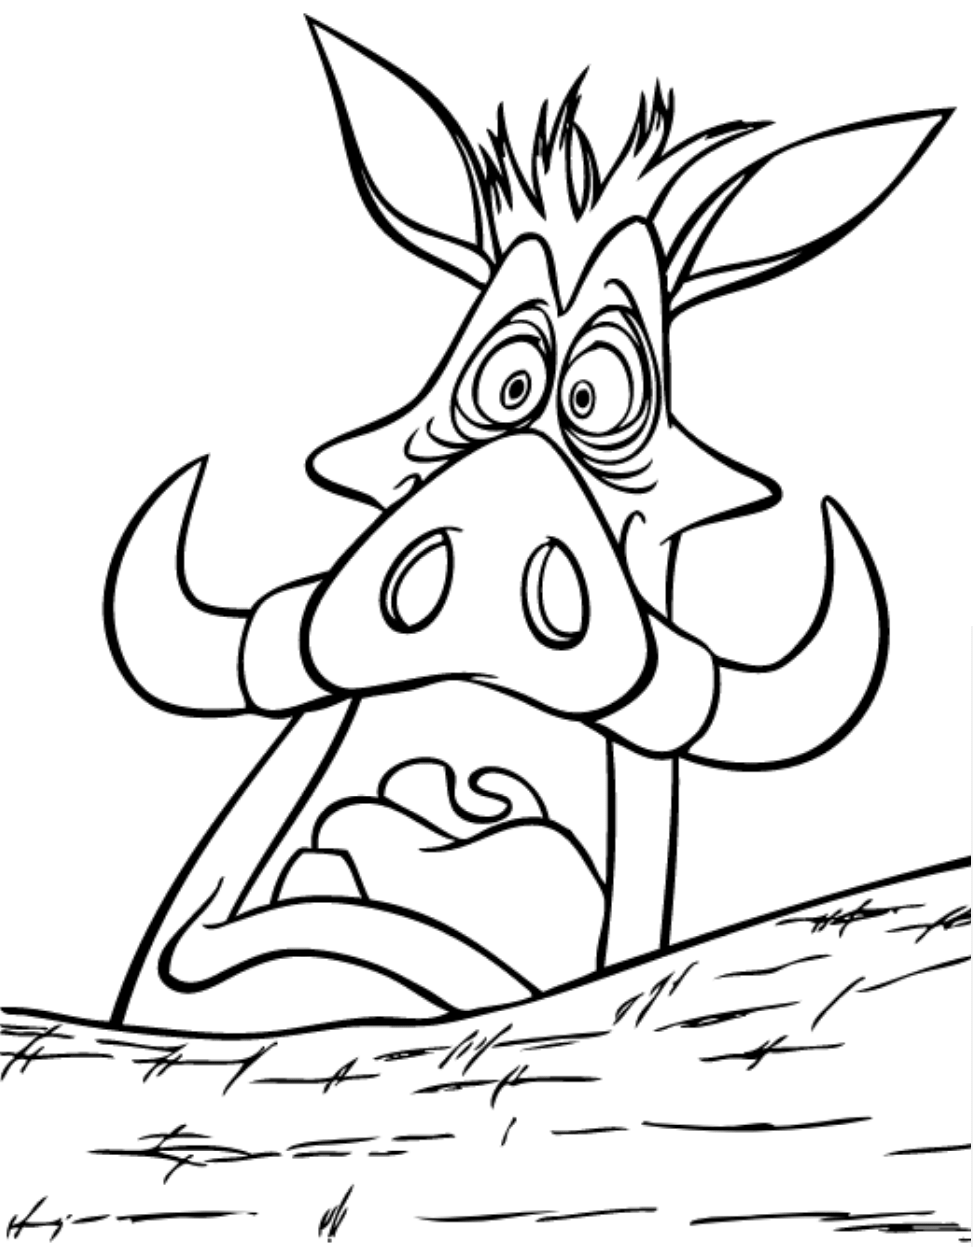 Pumbaa Is Horrified Coloring Page - Free Printable Coloring Pages for Kids